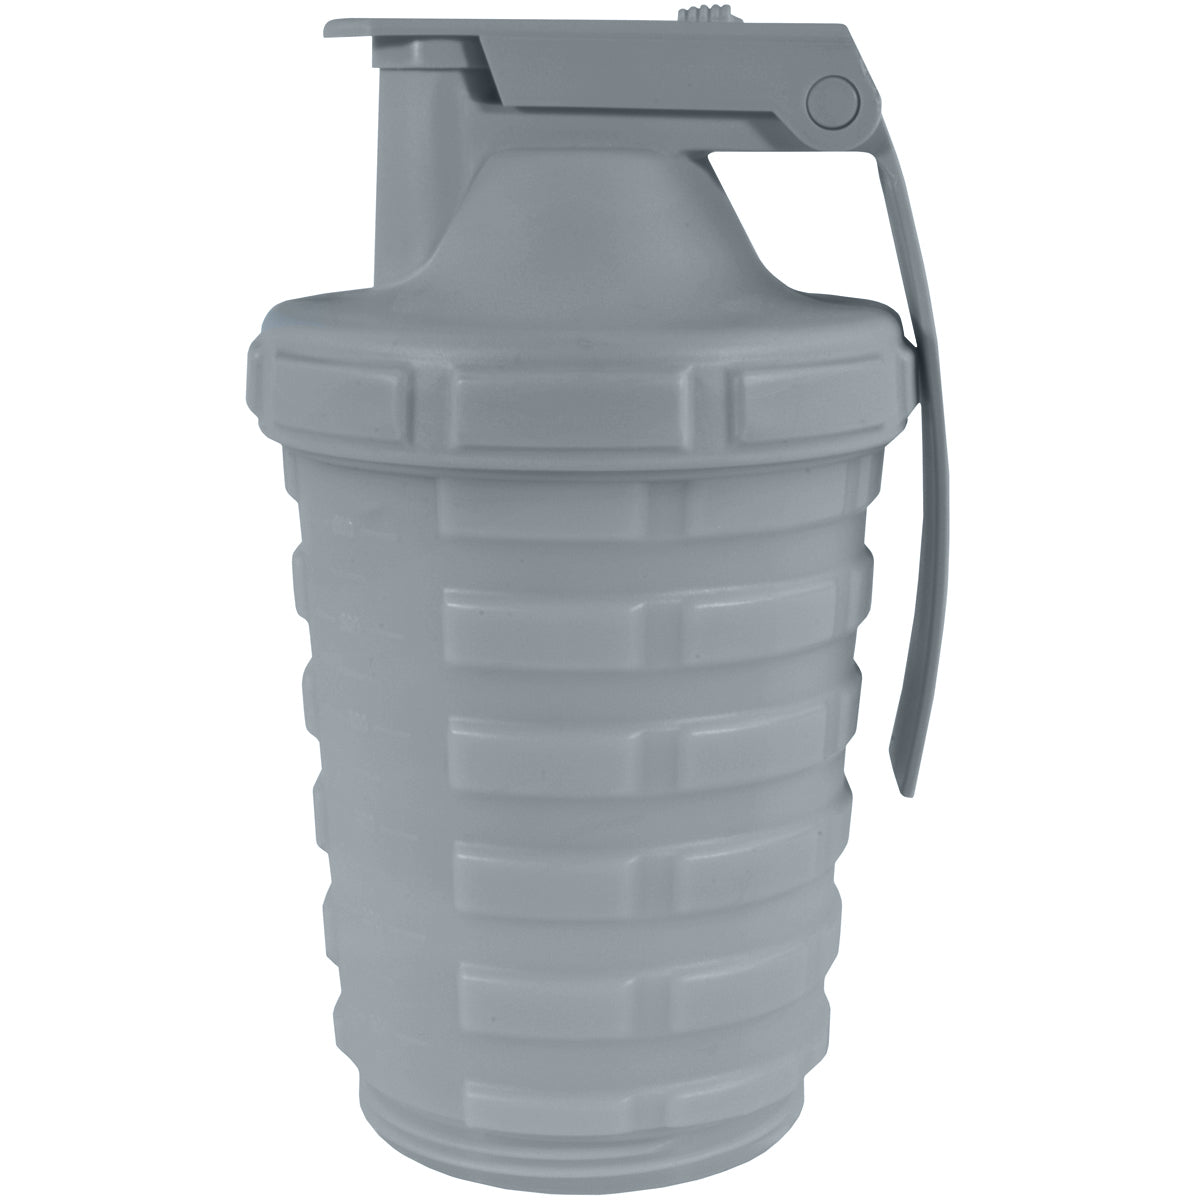 Grenade 20 oz. Shaker Blender Mixer Bottle with 600ml Protein Cup Compartment Grenade